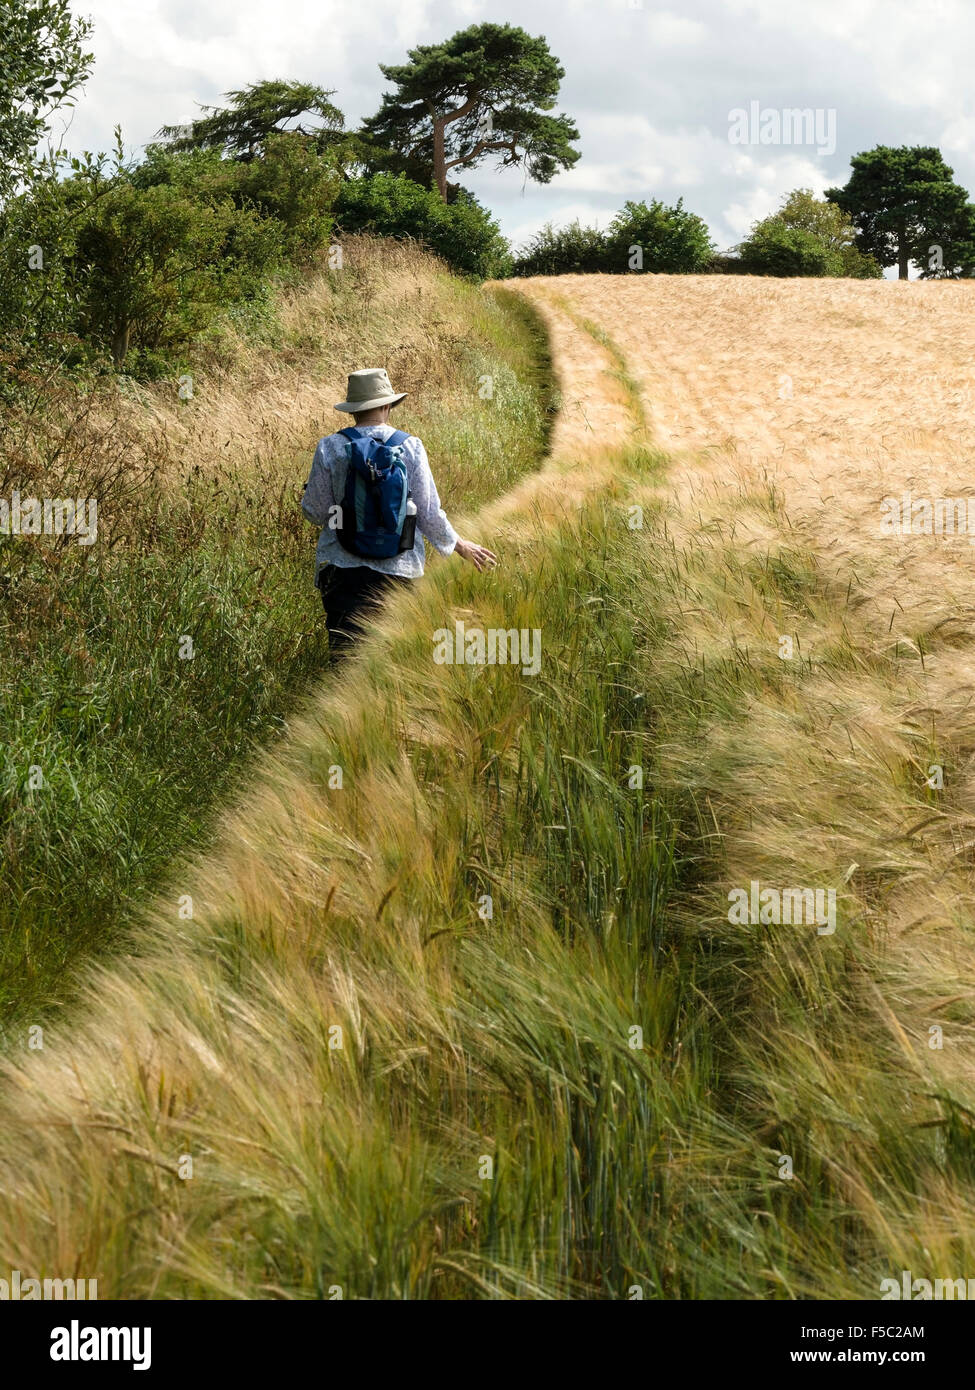 Woman in sun hat walking along edge of ripe Barley field by a hedgerow, Leicestershire, England, UK. Stock Photo